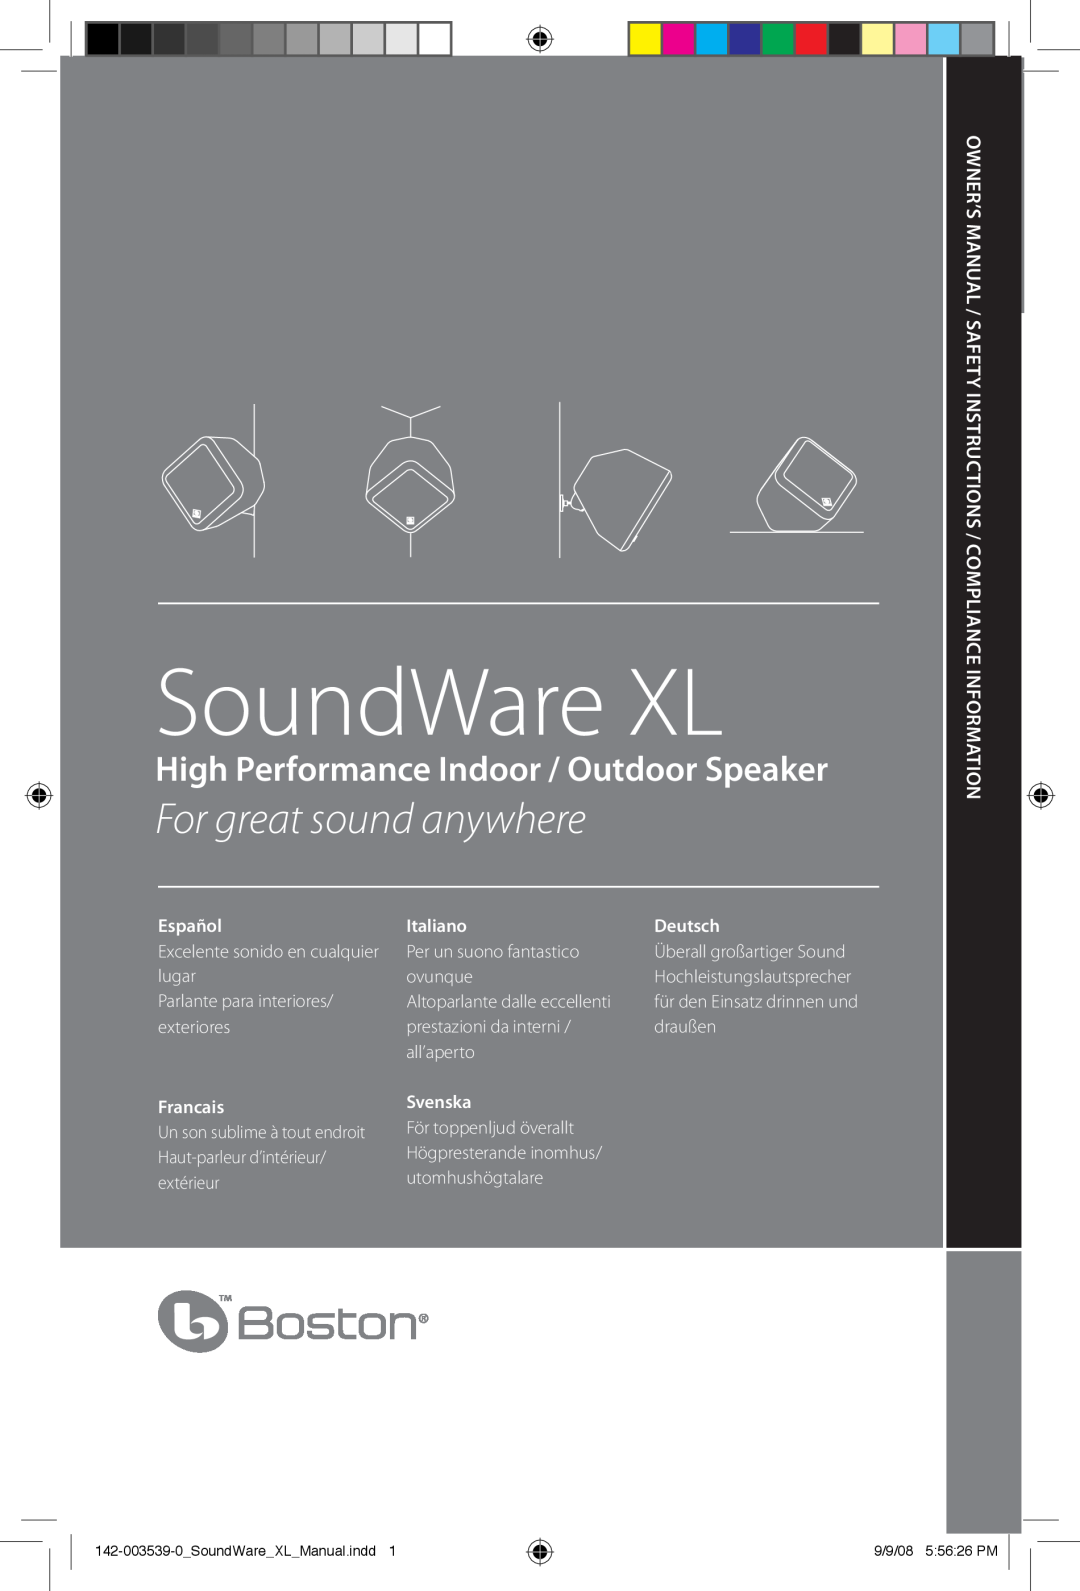 Boston Acoustics SoundWare XL owner manual For great sound anywhere, High Performance Indoor / Outdoor Speaker, Owner’sg 